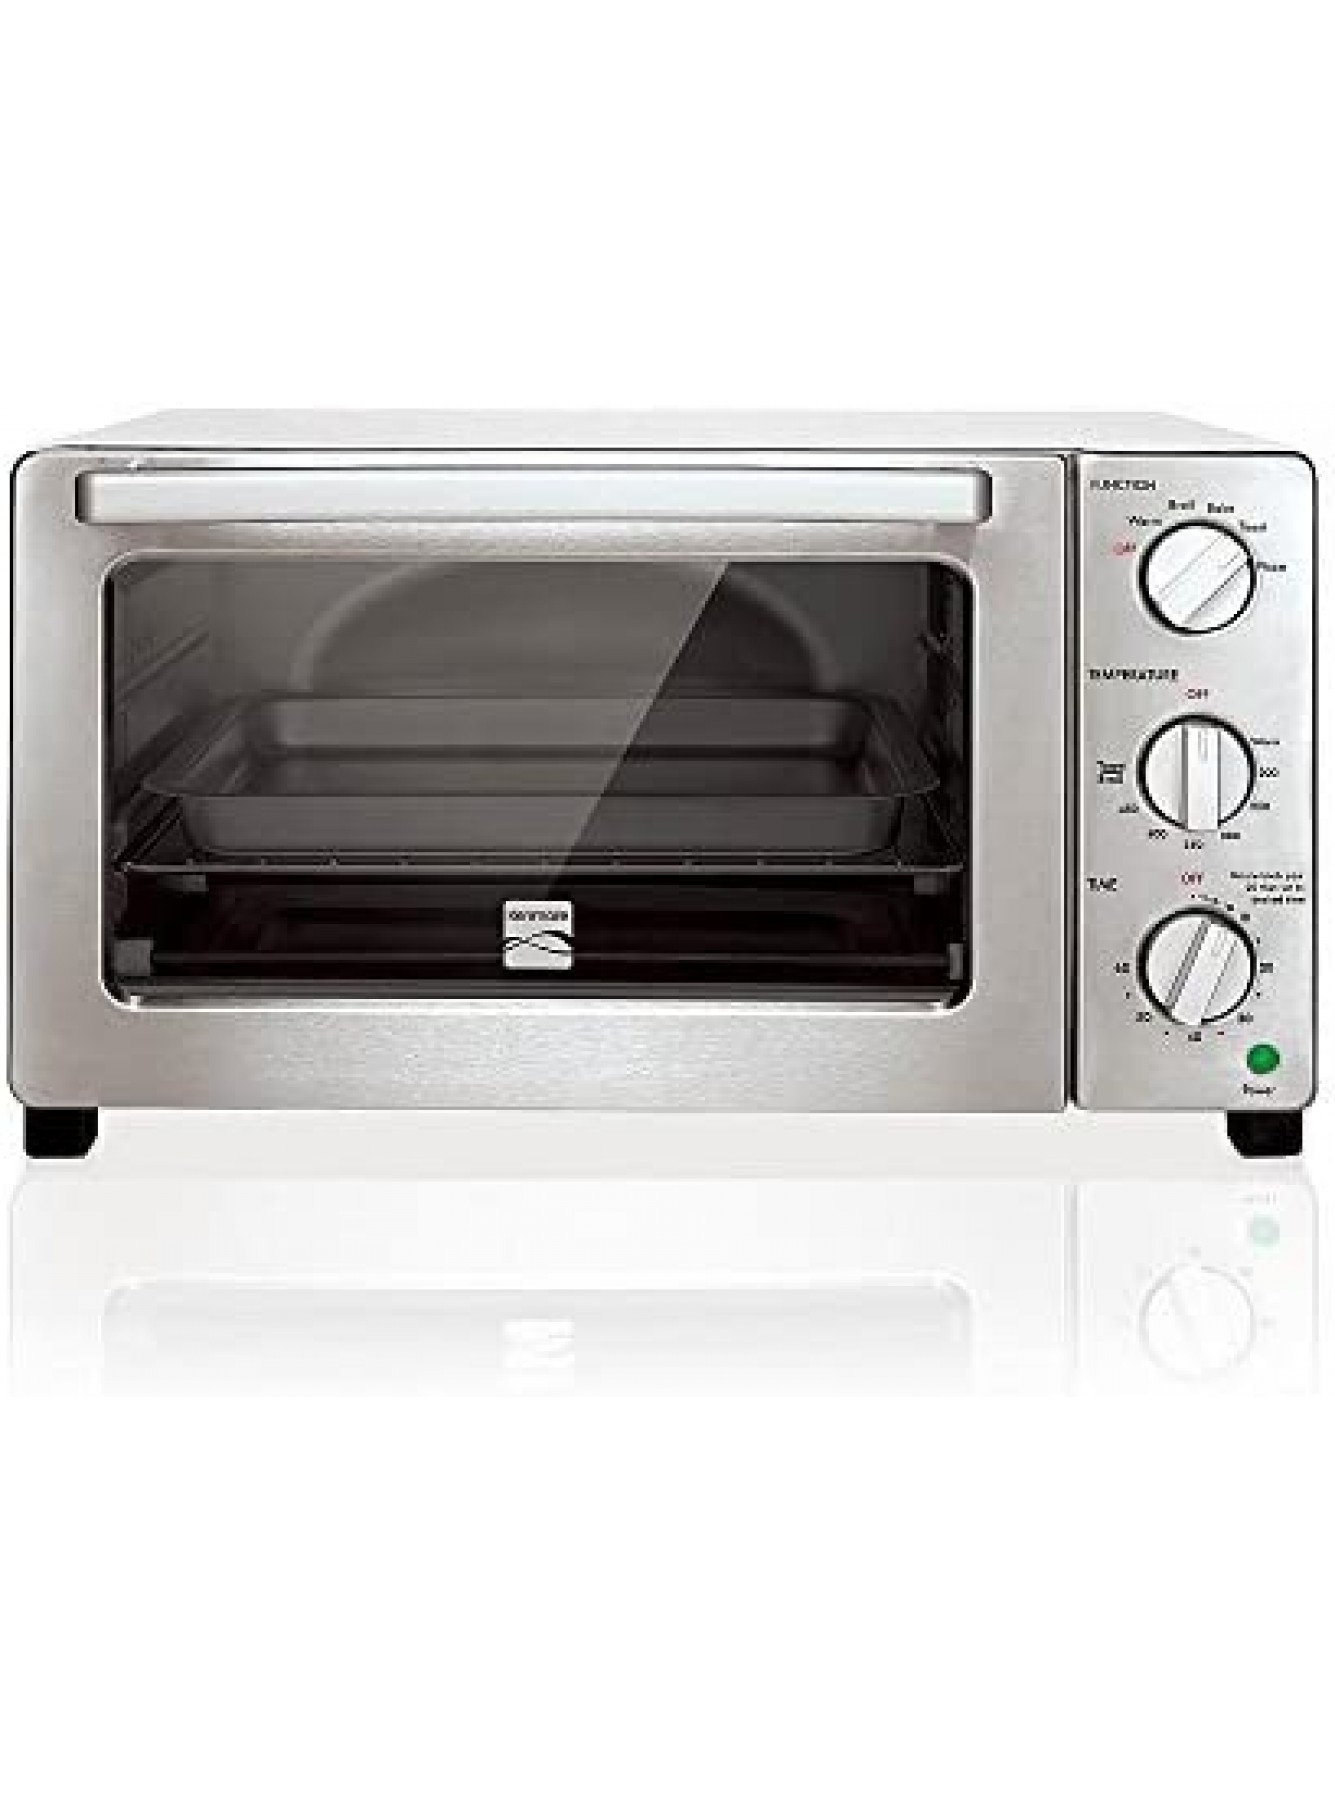 Kenmore 6-Slice Convection Toaster Oven White B00A6J8HMI